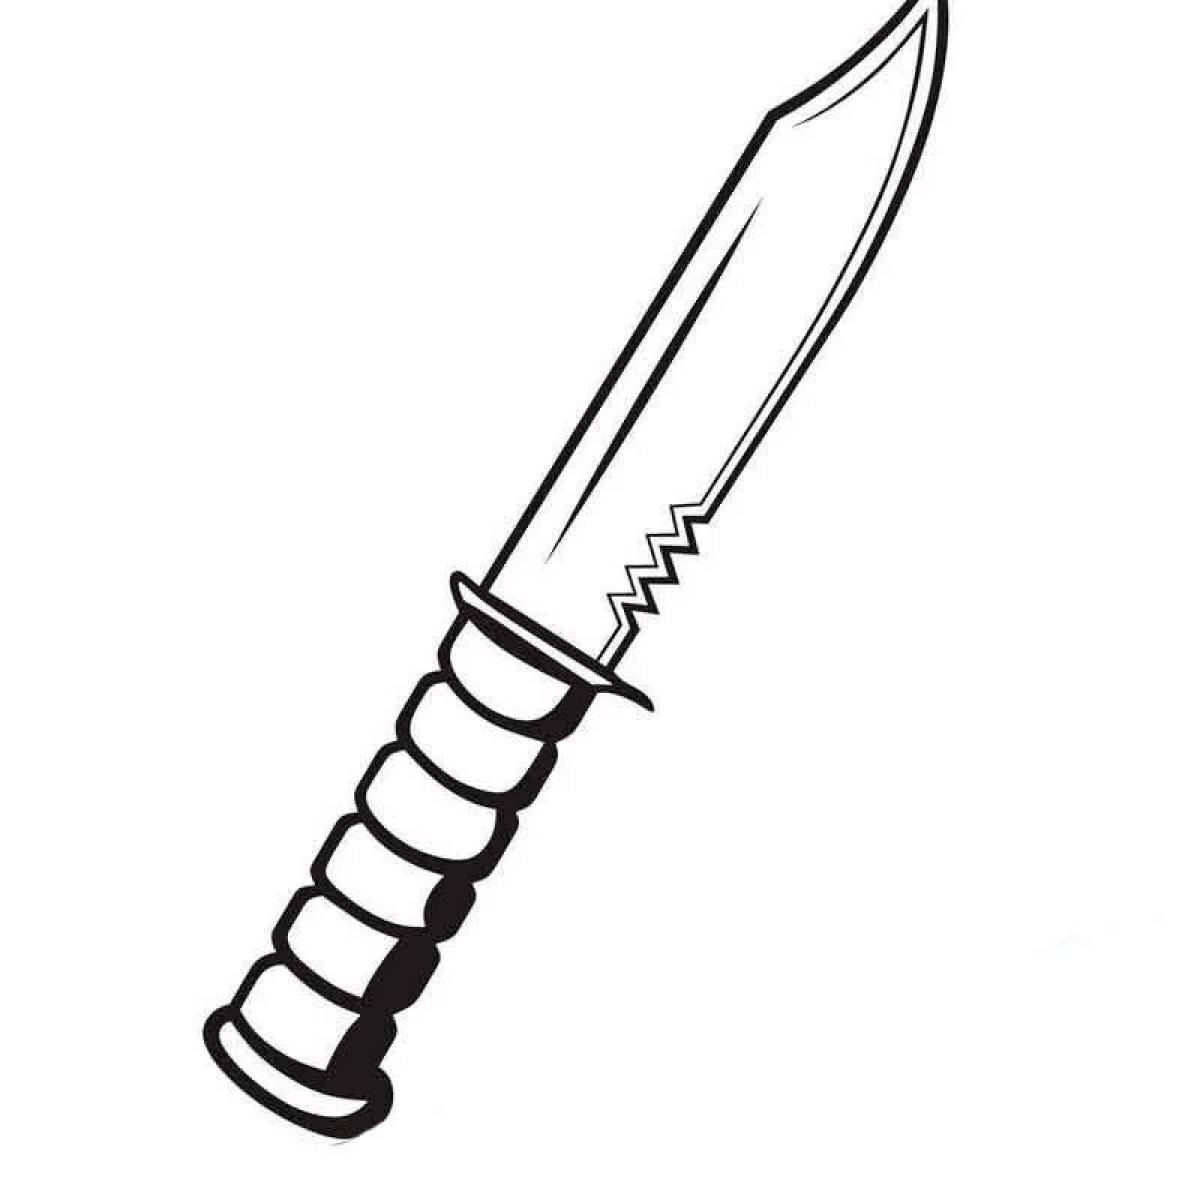 Multi-colored knife from standoff 2 coloring page